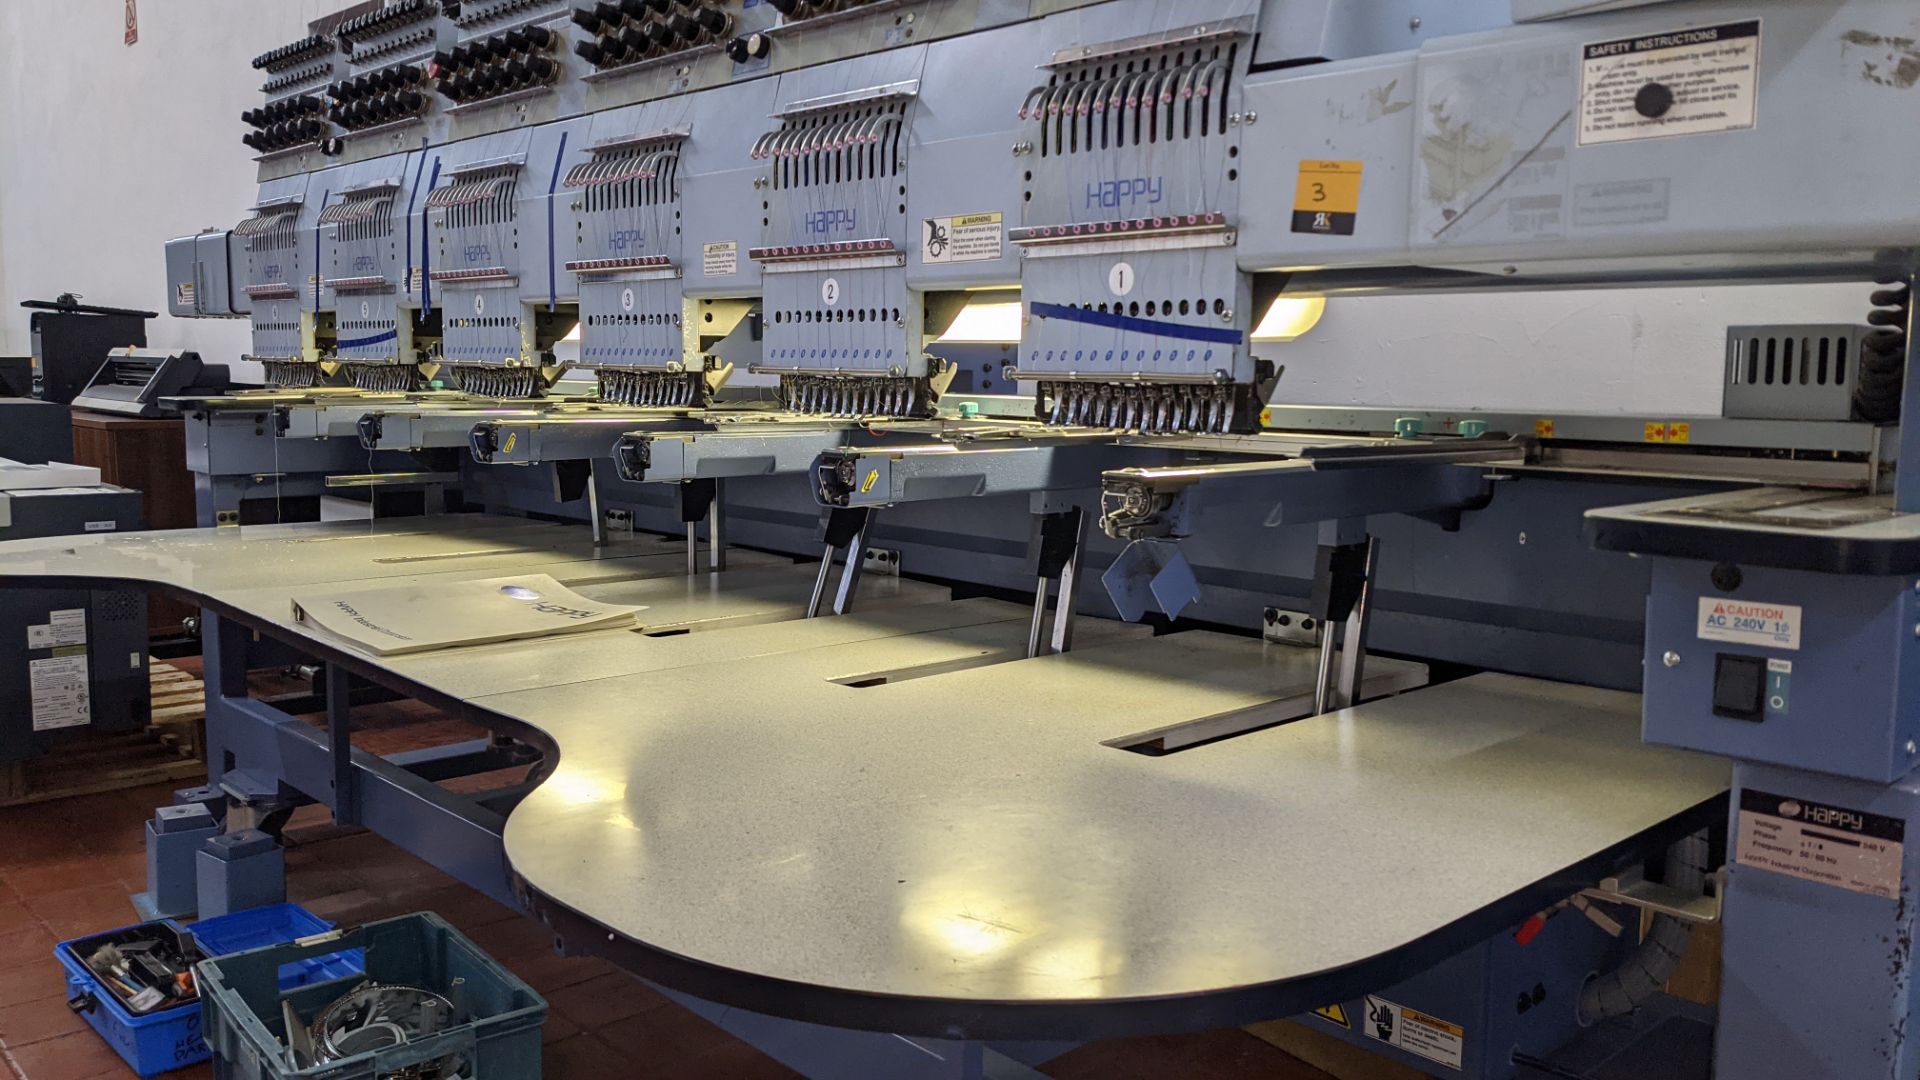 Happy Industrial Corporation model HCG-120G-45TCC 6-head embroidery machine - Image 17 of 34